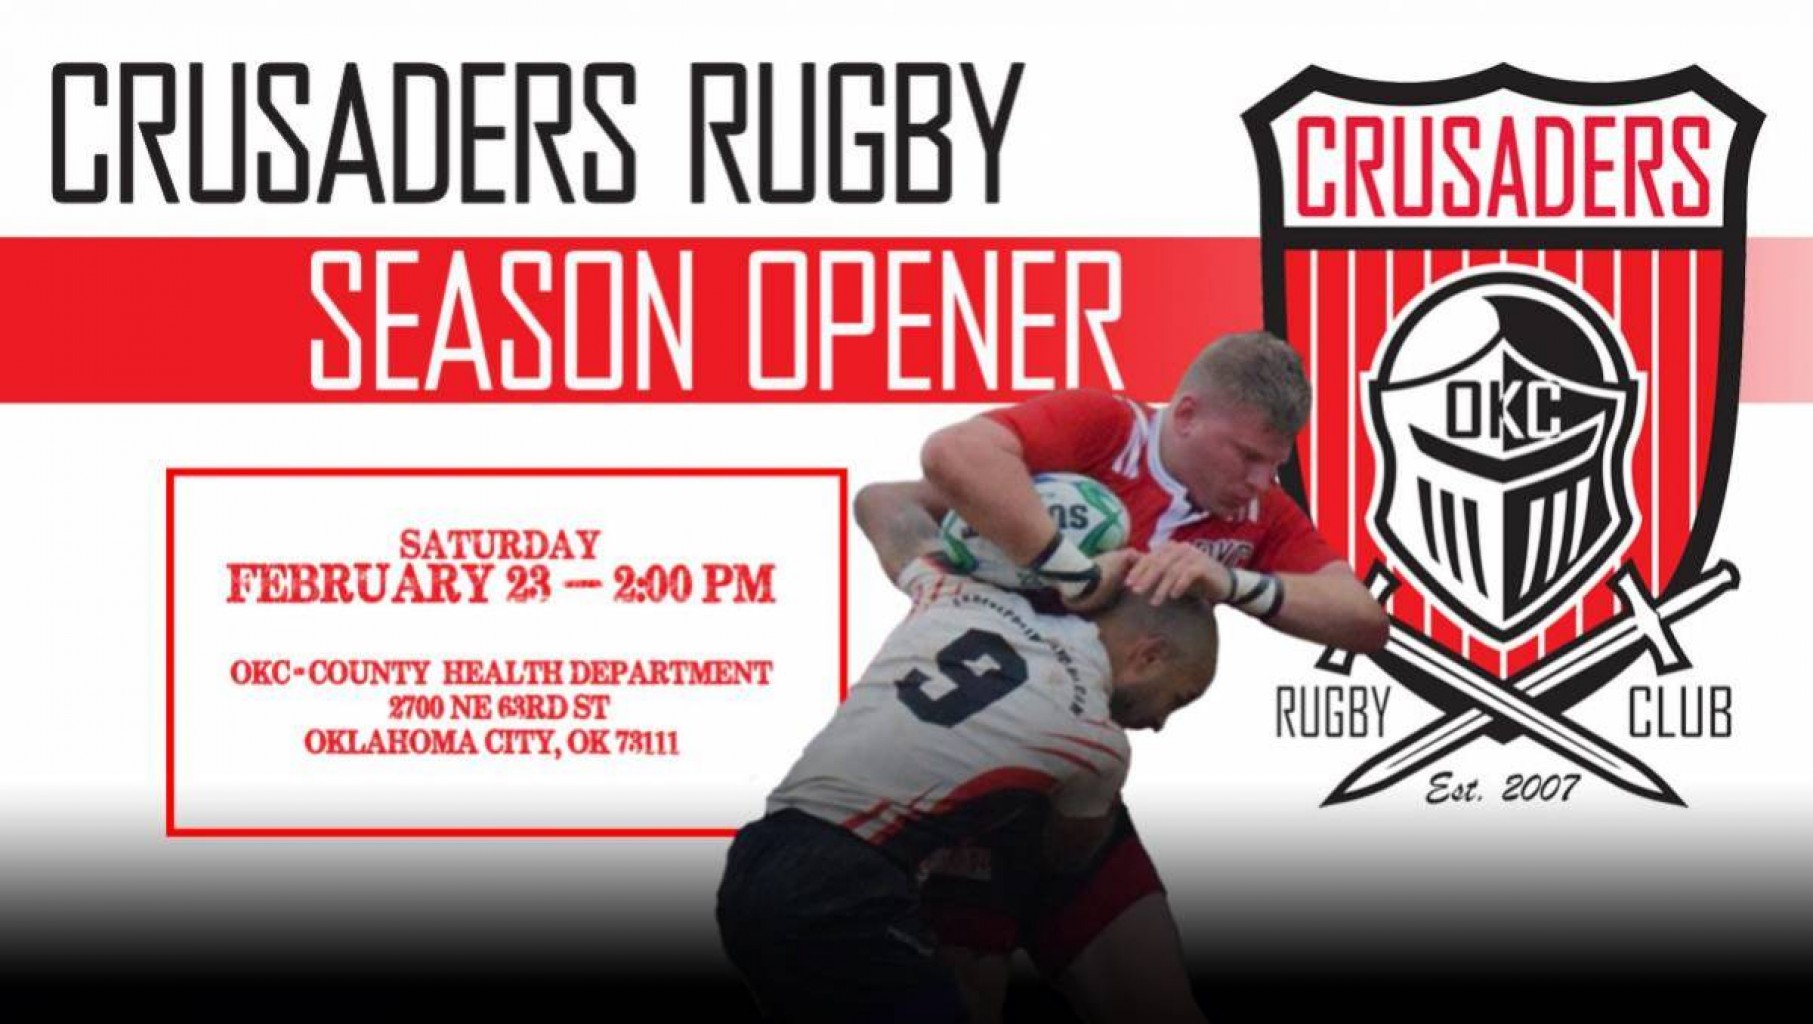 ENERGY FC TO HOST OKC CRUSADERS RUGBY CLUB MATCHES 